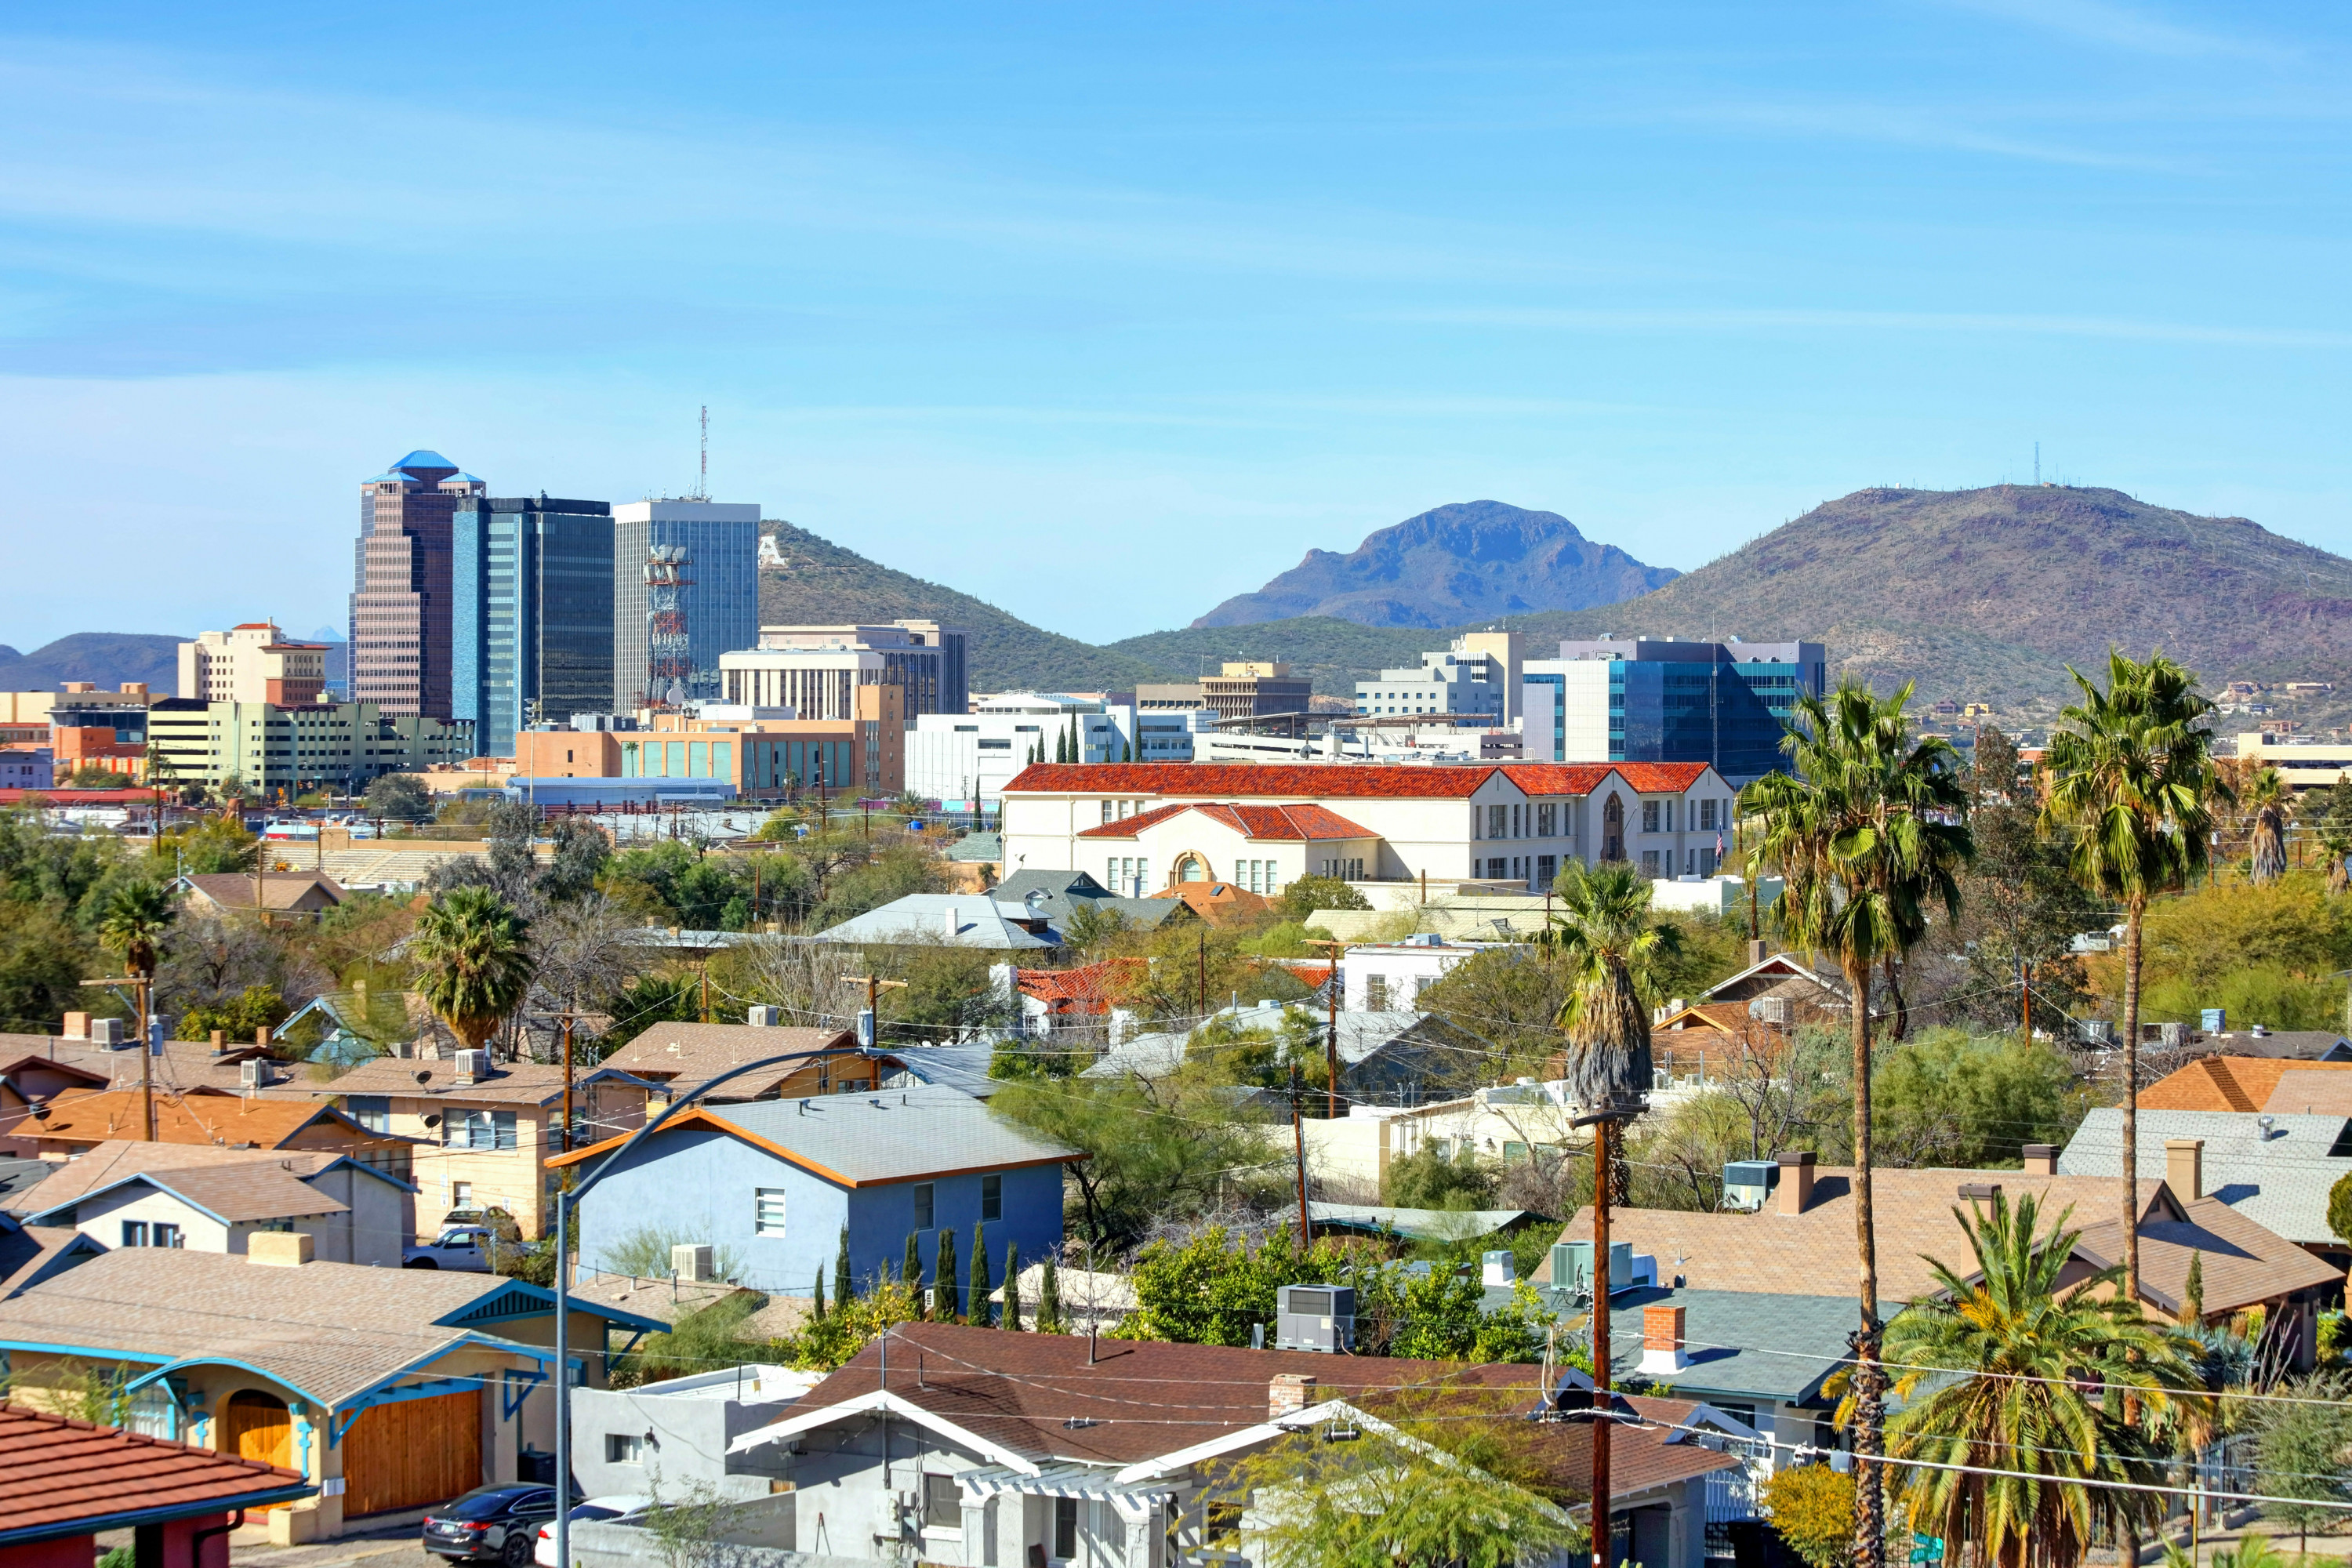 Tucson, Arizona | 100 Up-and-Coming Real Estate Markets to Watch in 2020 | Buildium